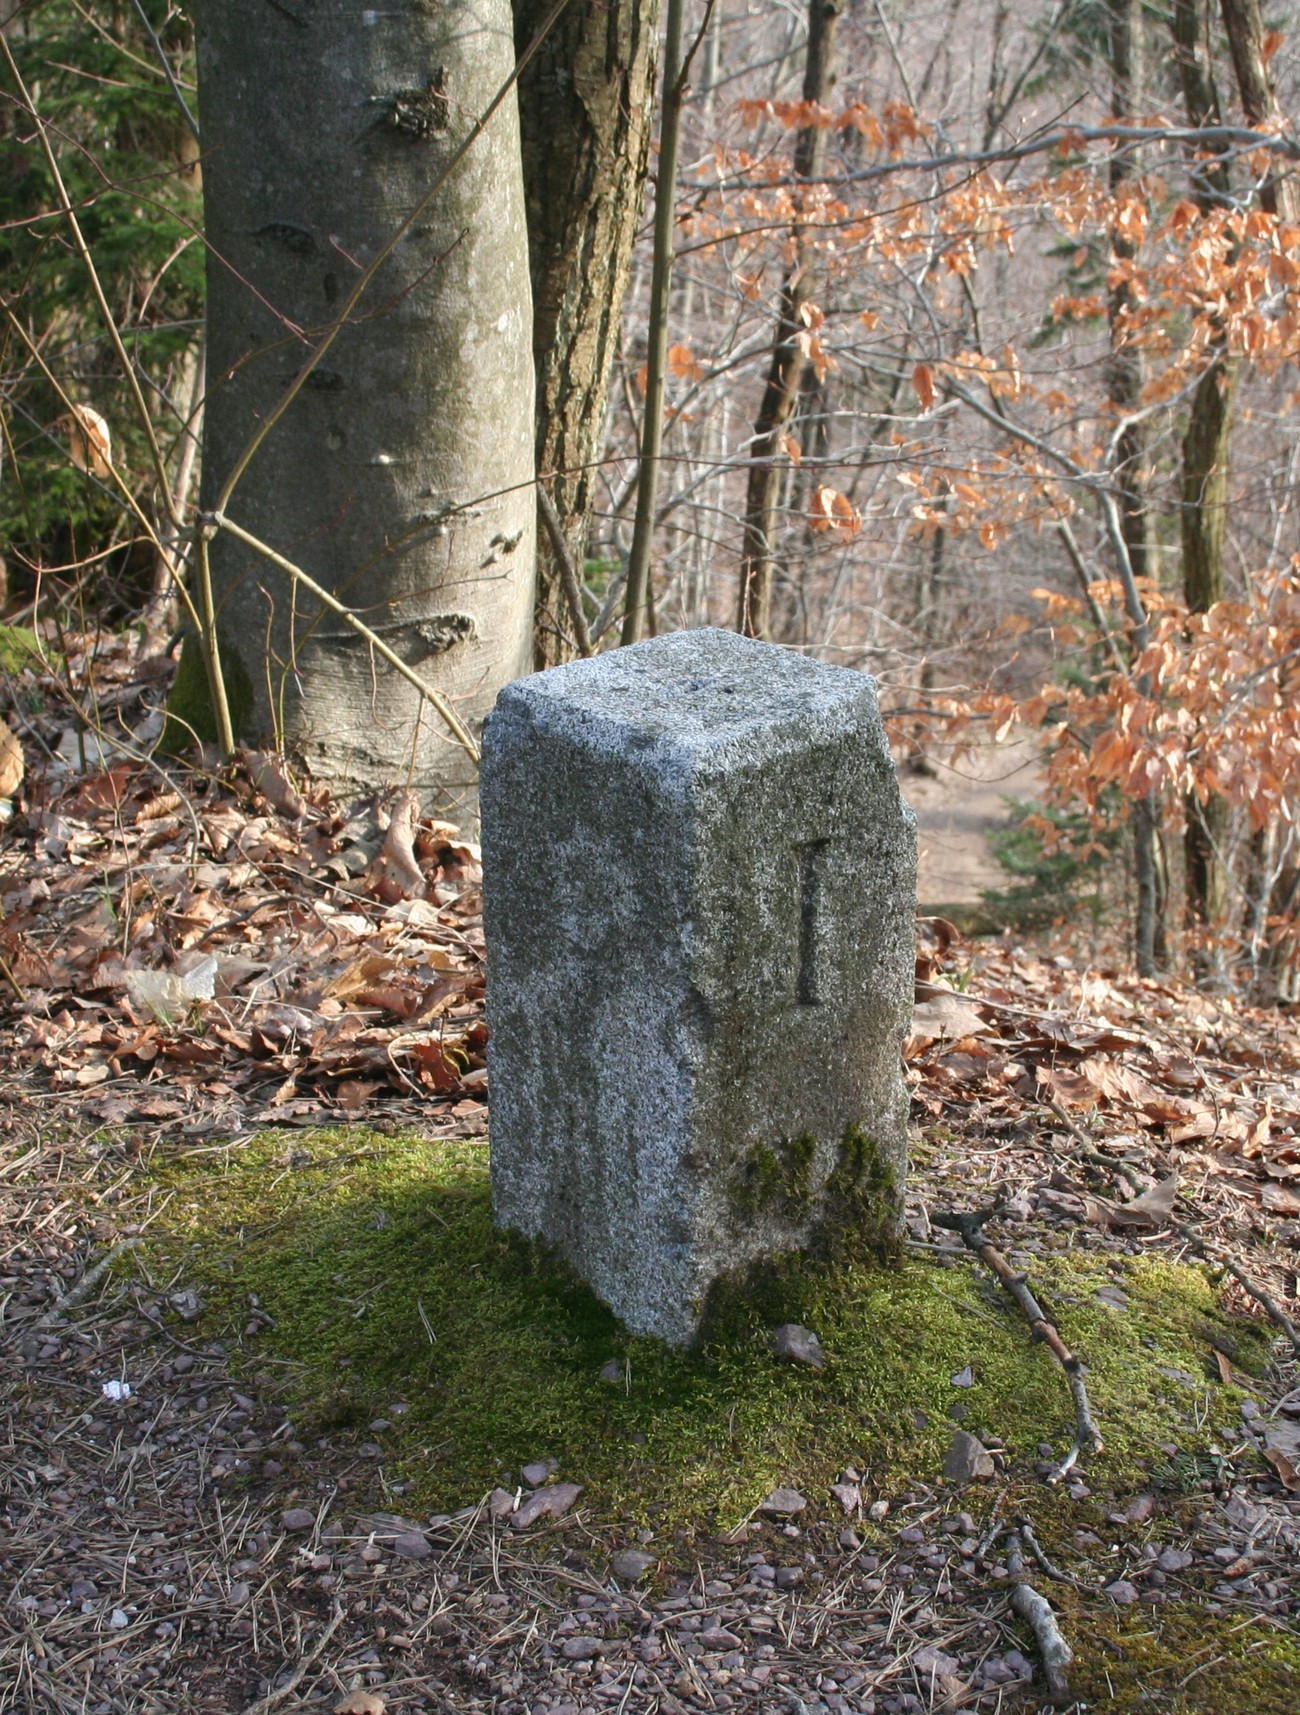 A boundary marker between Germany and Italy. The chiselled letter I standing for Italy is clearly visible. Author: Božidar Flajšman.